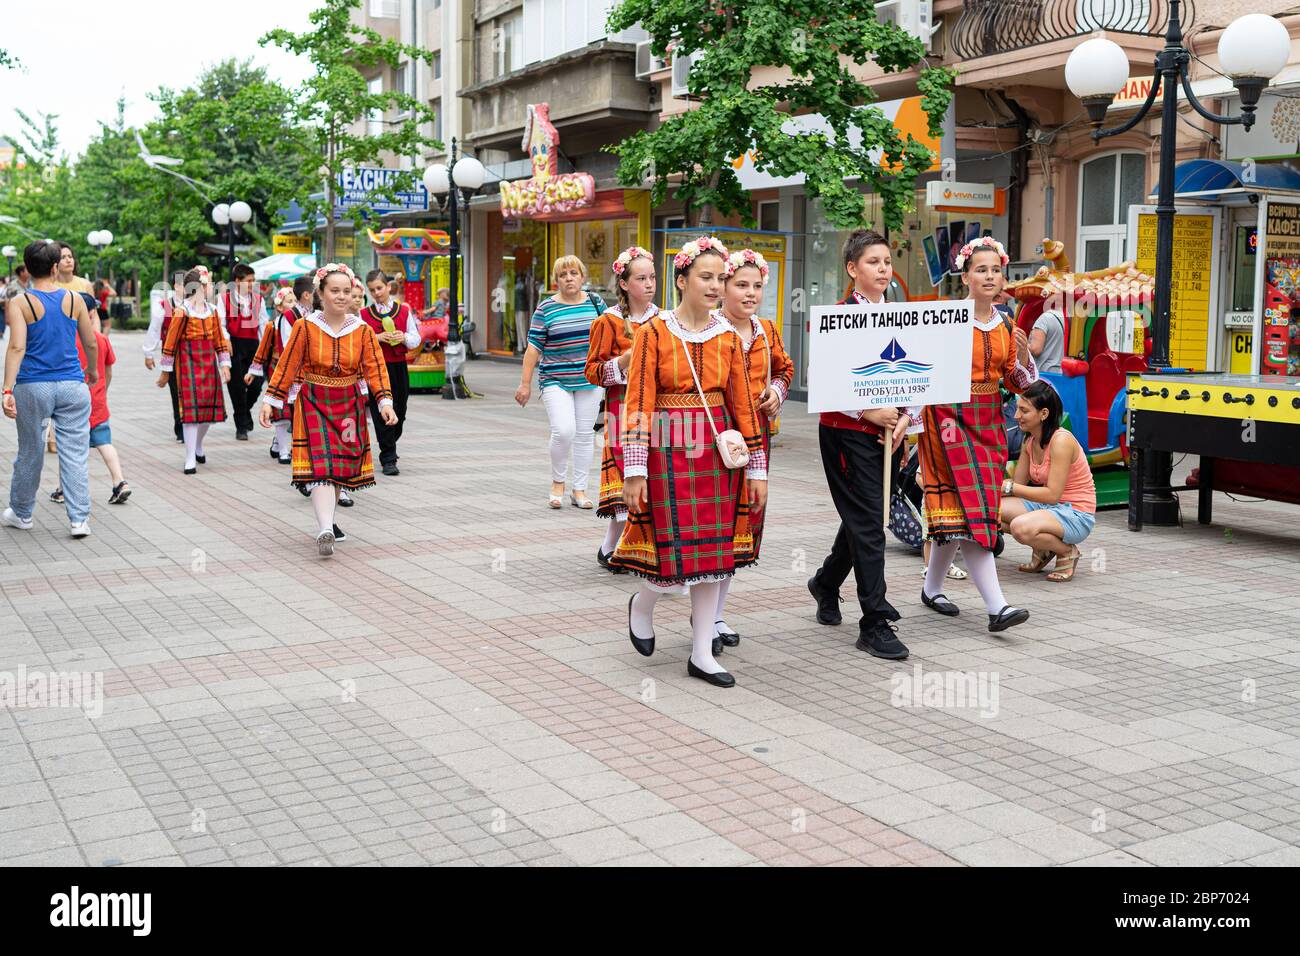 POMORIE, BULGARIA - JUNE 21, 2019: A group of children in Bulgarian national costumes on the streets. Stock Photo